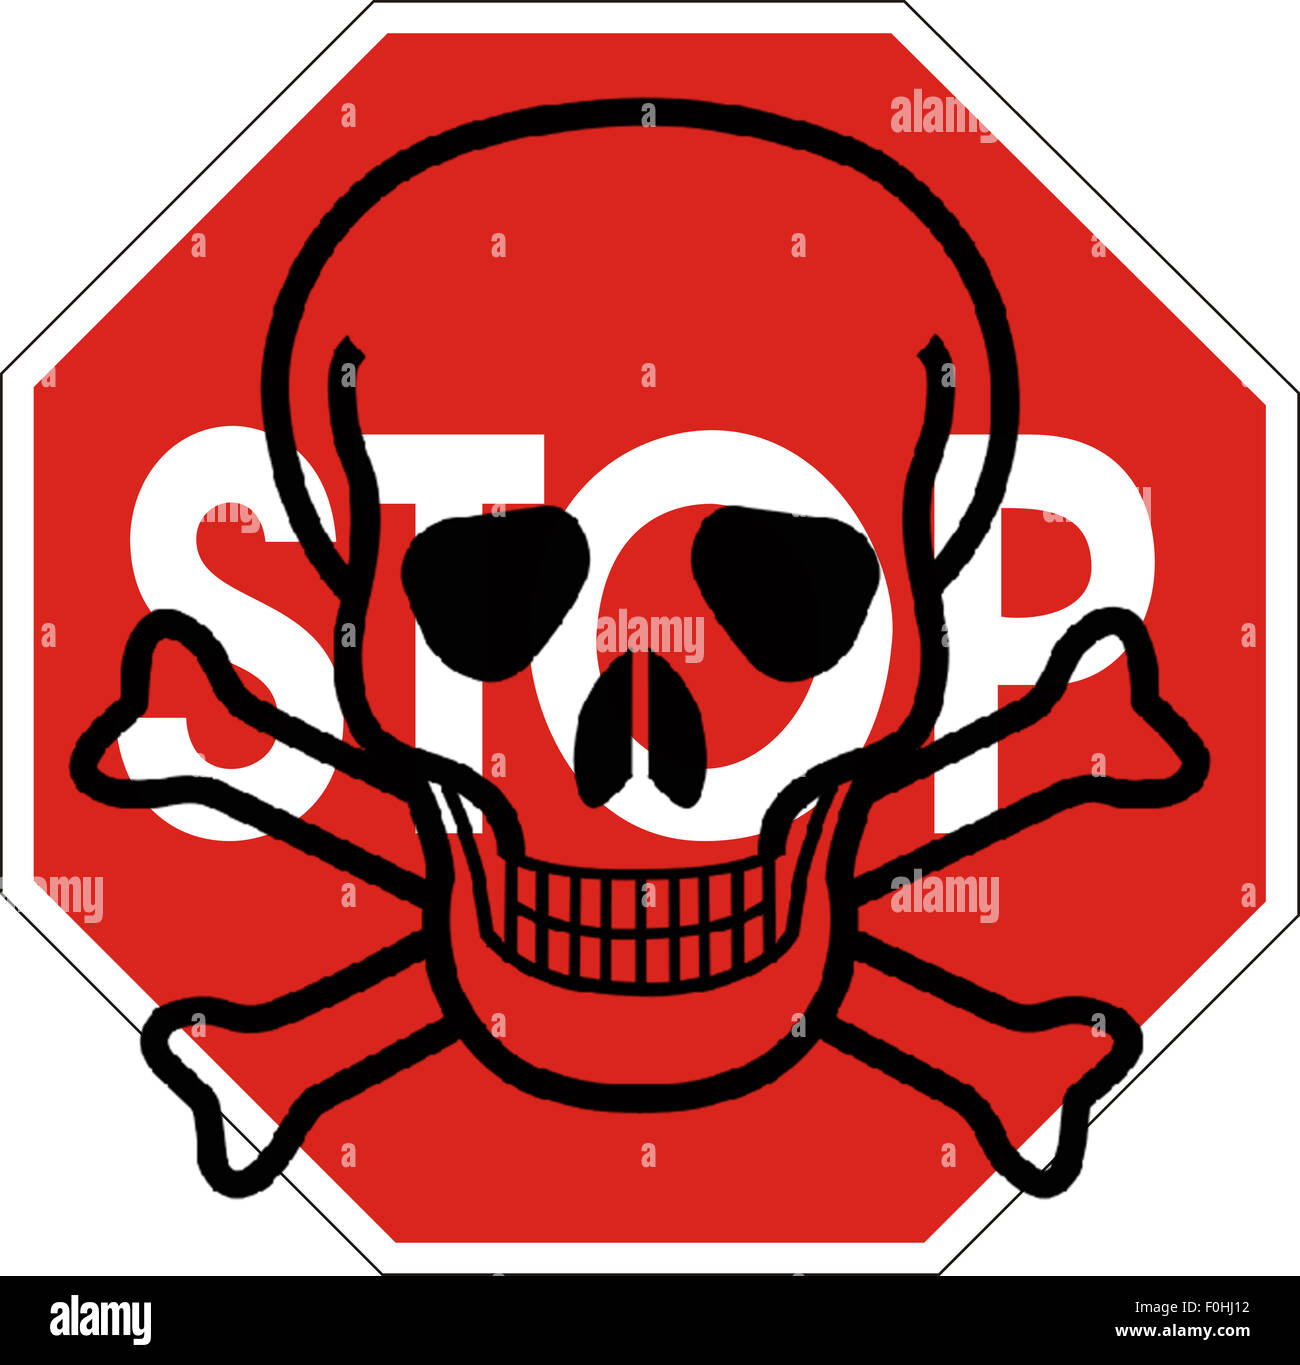 conceptual Stop sign with skull superimposed traffic warning Stock Photo